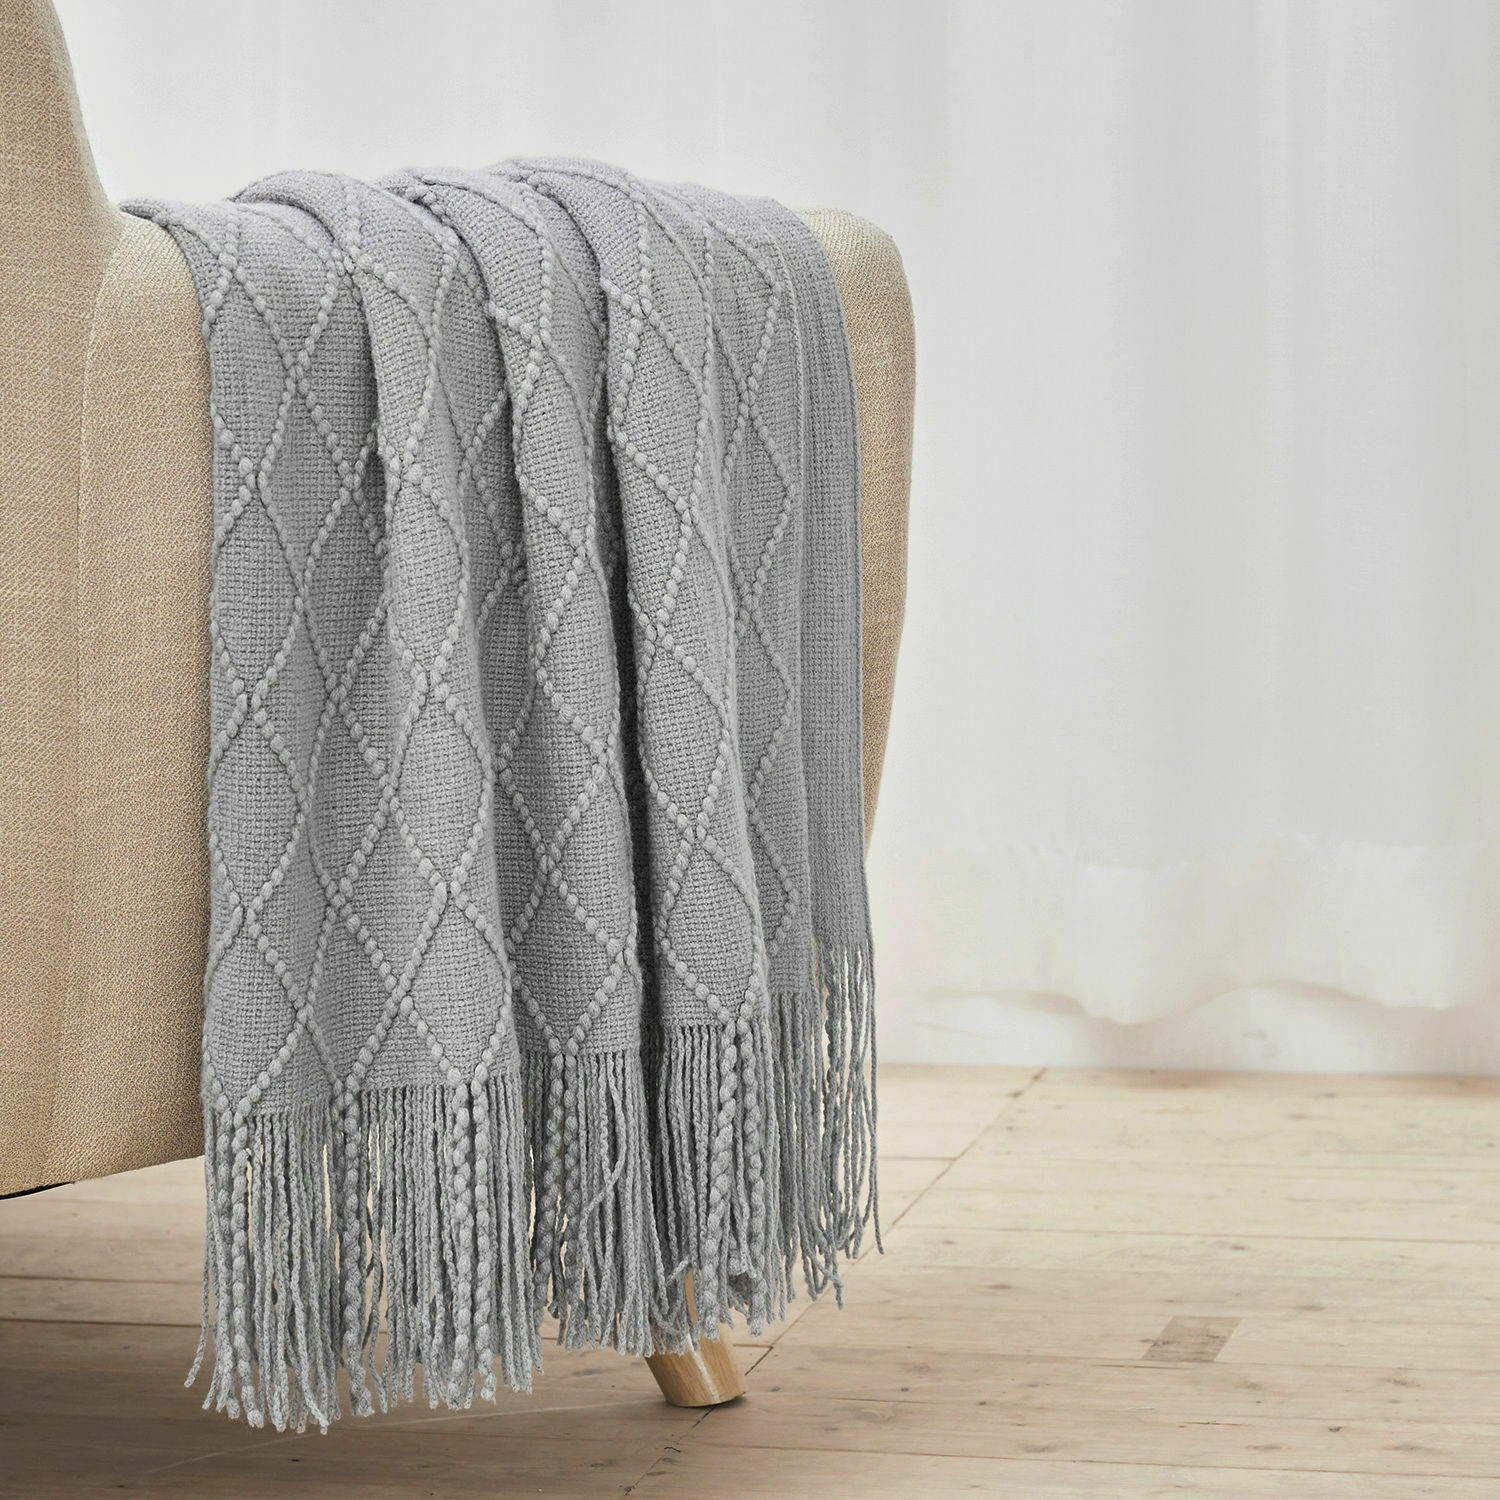 Soft Knitted Throw Blanket for Living Room Bedroom Couch Lightweight 50”x60”